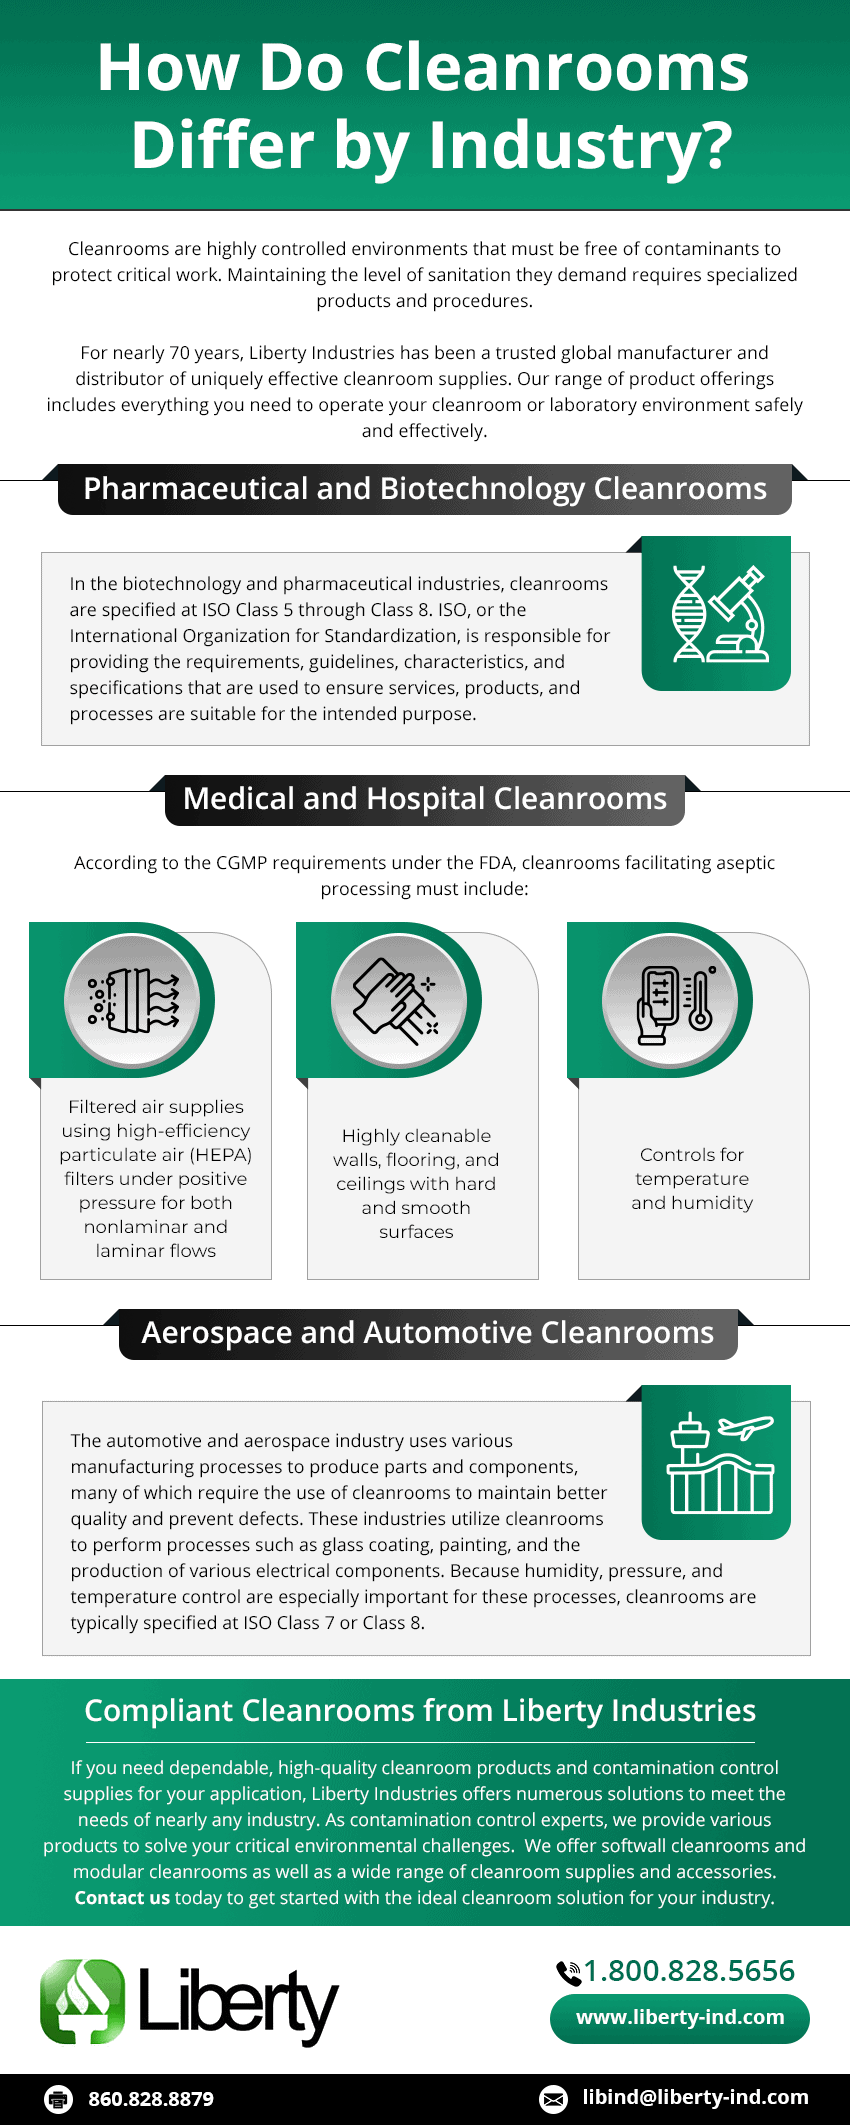 How Do Cleanrooms Differ by Industry?